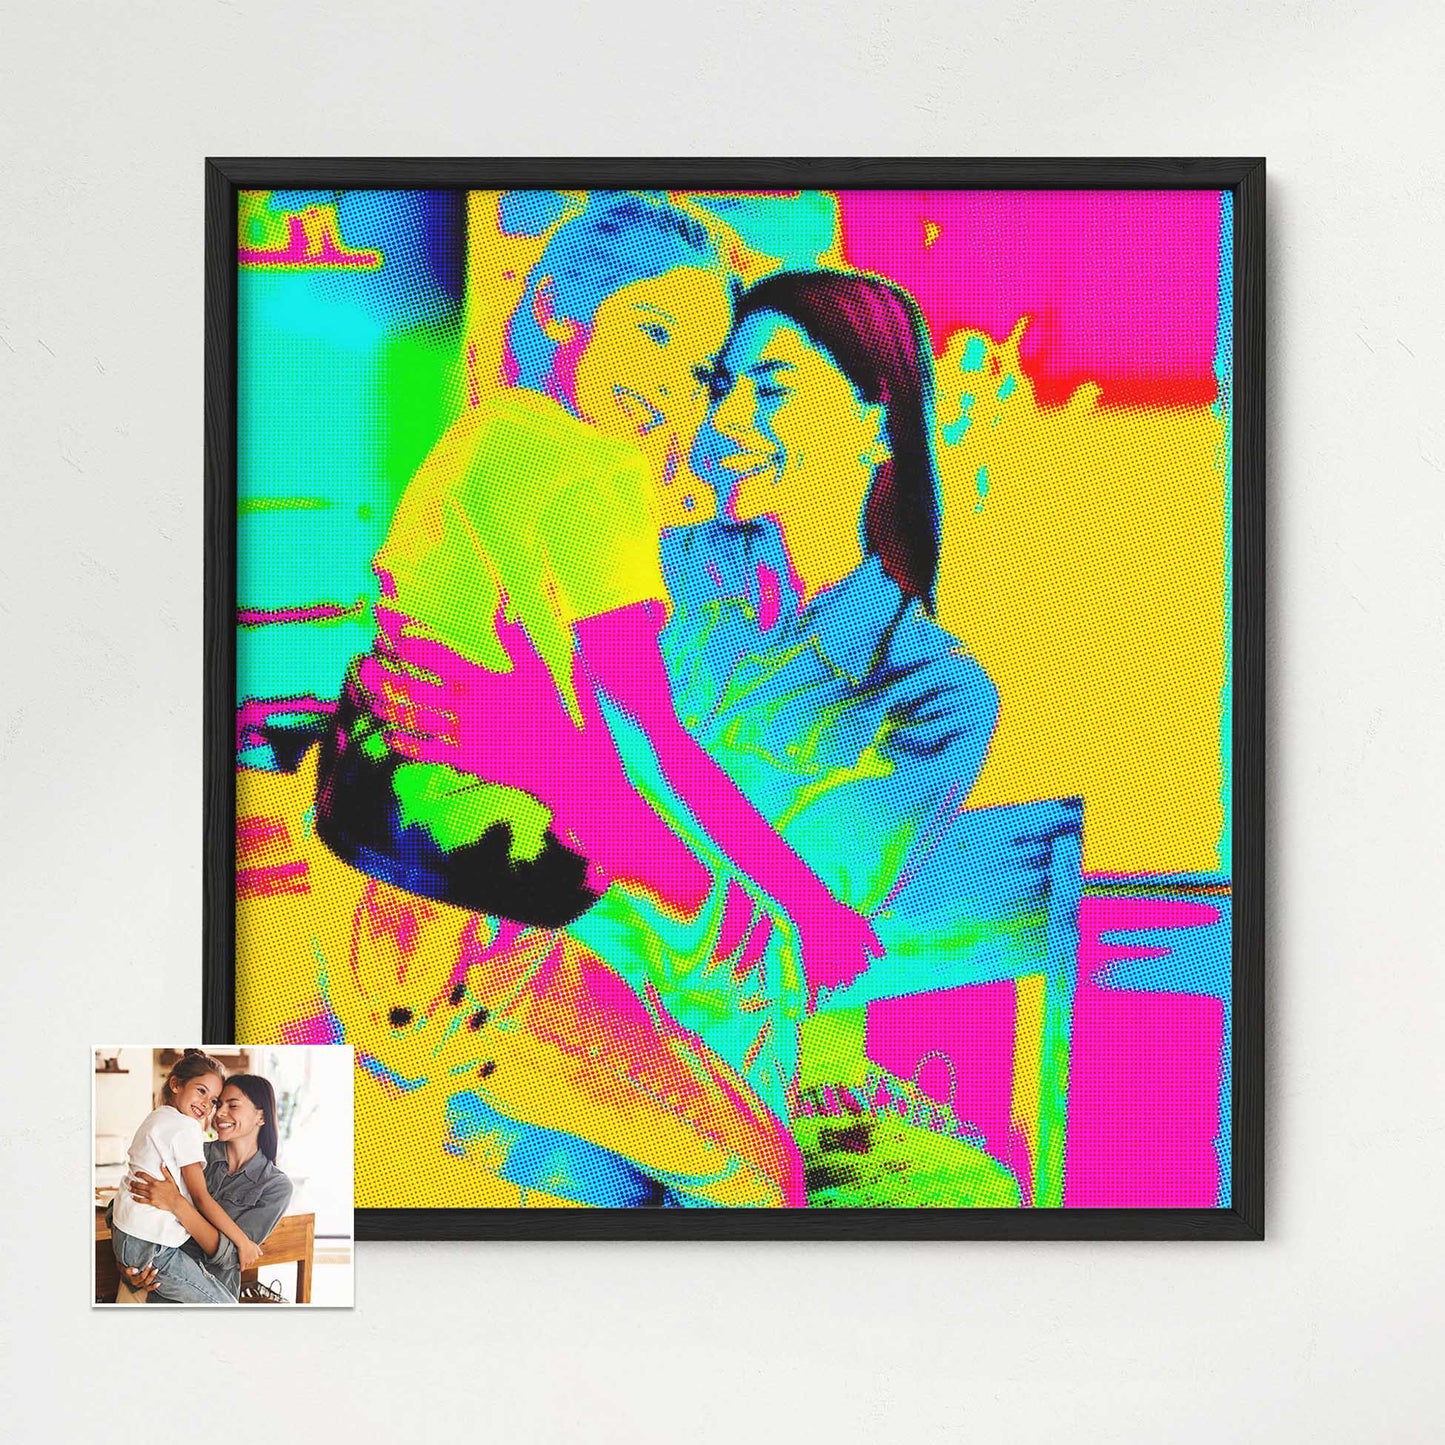 Infuse your home with the vibrant energy of our Personalised Pop Art Framed Print. Created by printing from photo, it showcases a bold pop art style with a halftone effect. The striking colors of pink, orange, green, and blue 